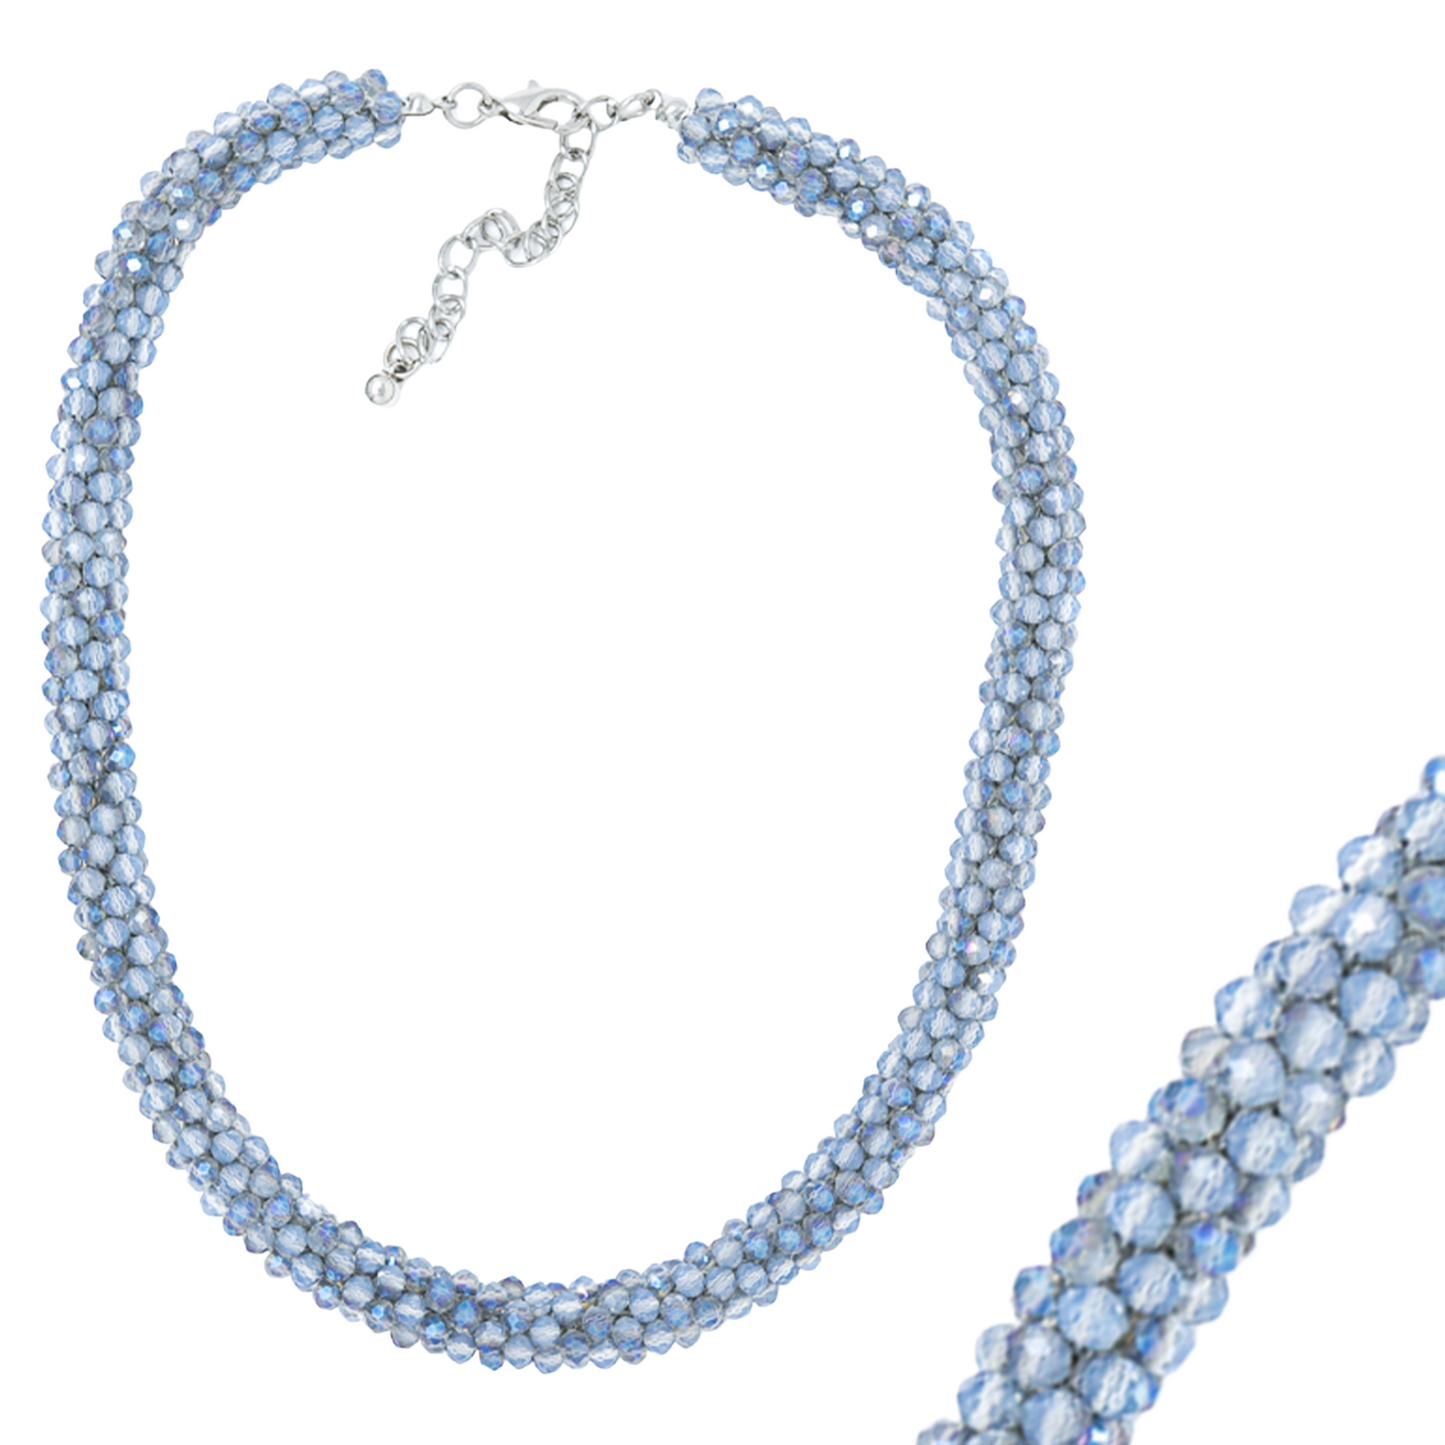 N-109 Blue Gray Glass Bead Necklace